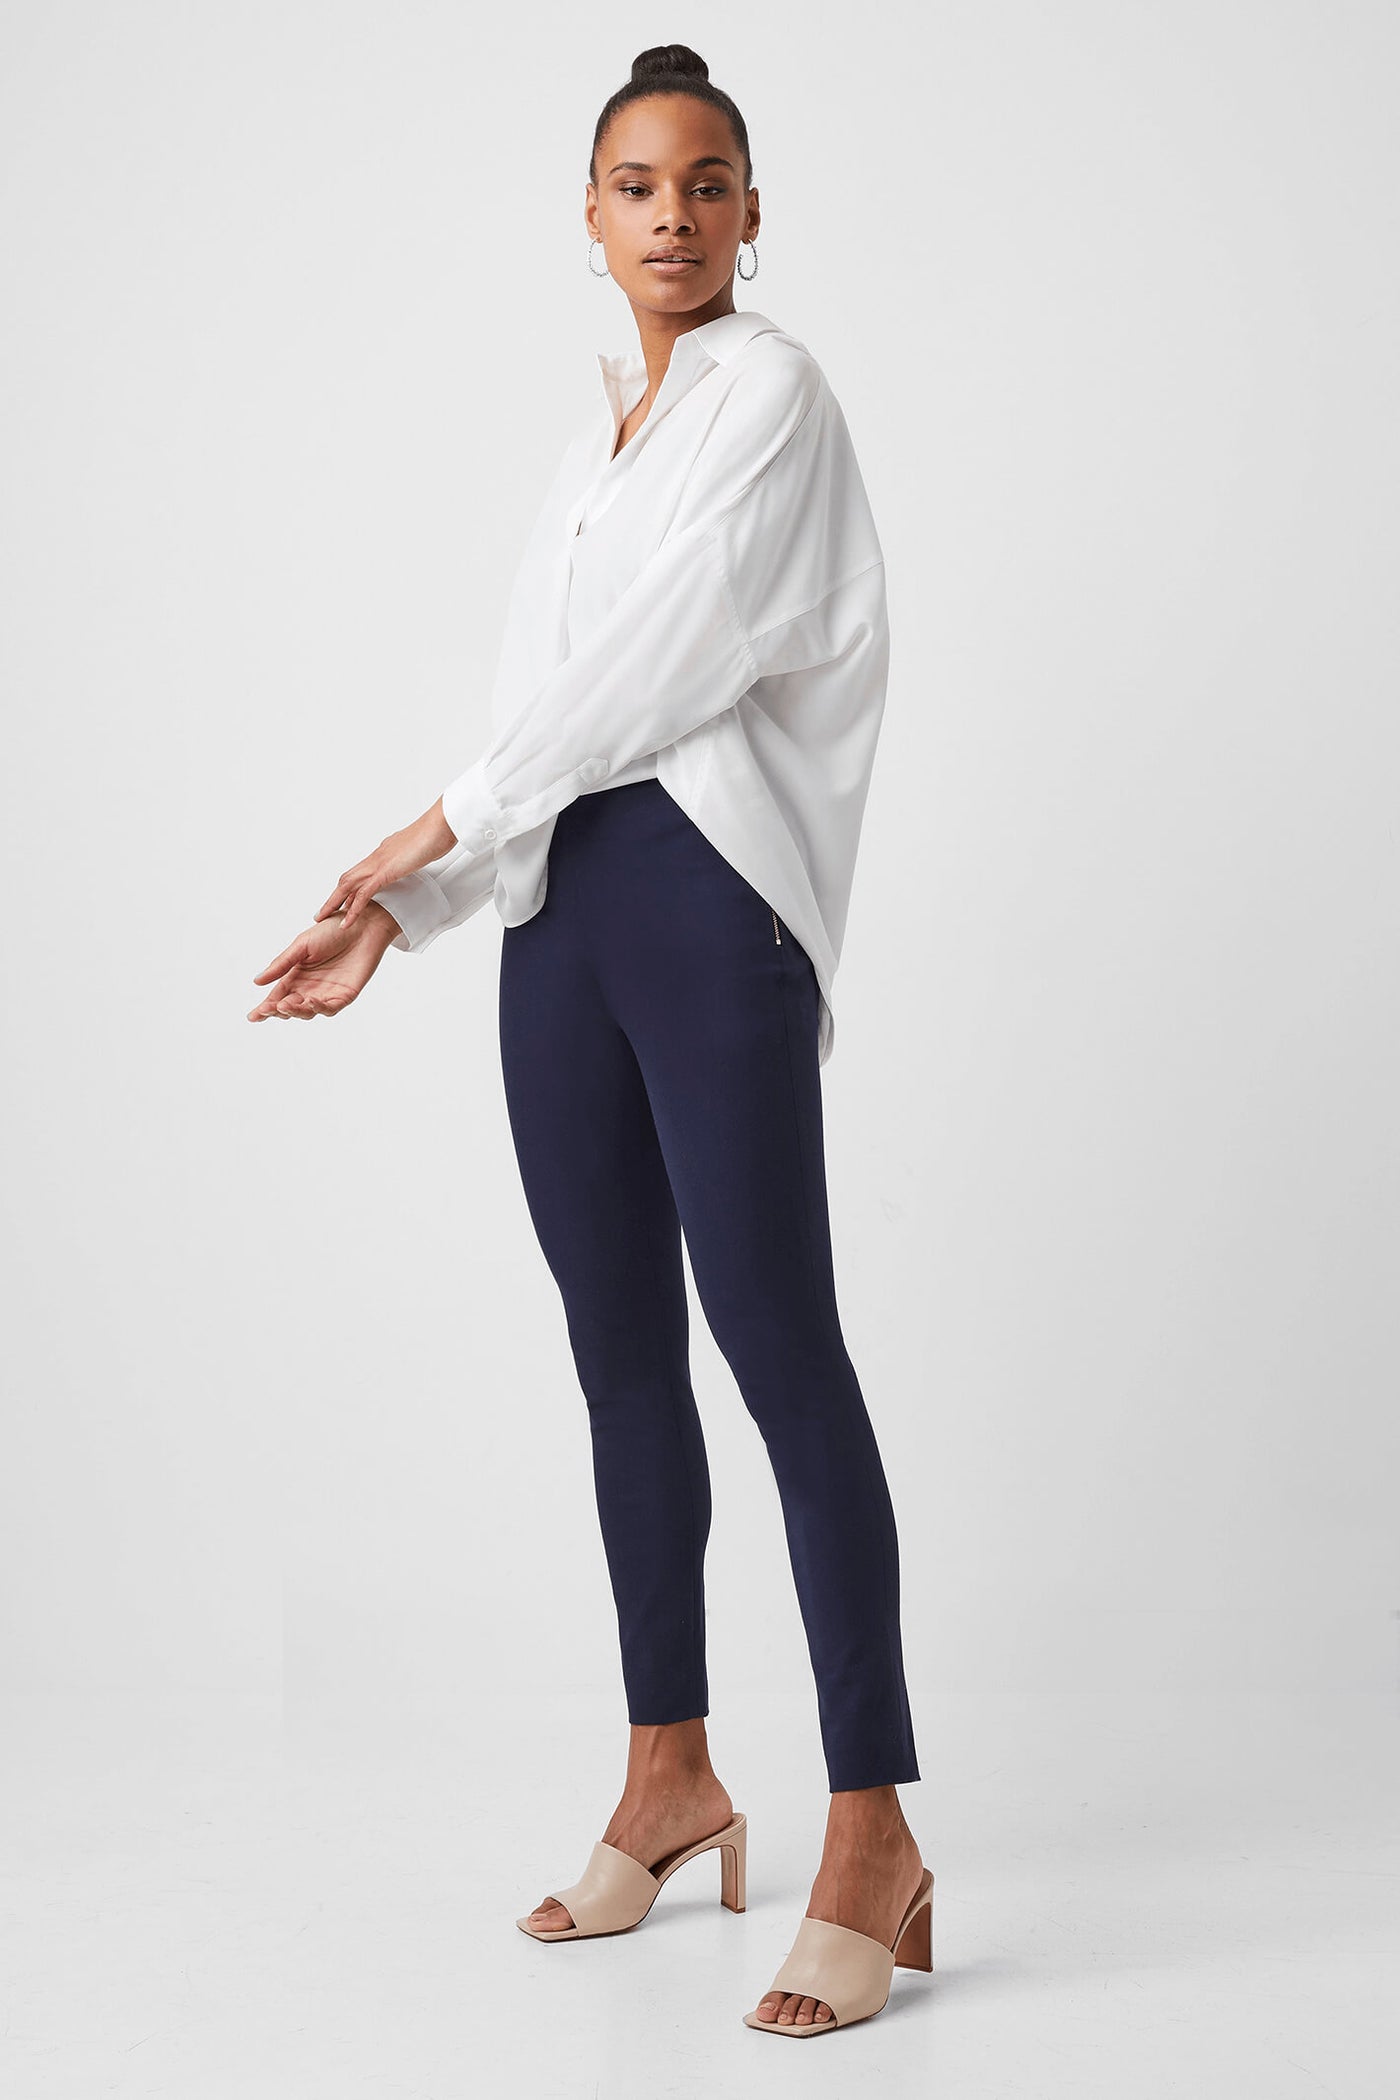 French Connection Street Twill Navy Skinny Trousers - Jezabel Boutique